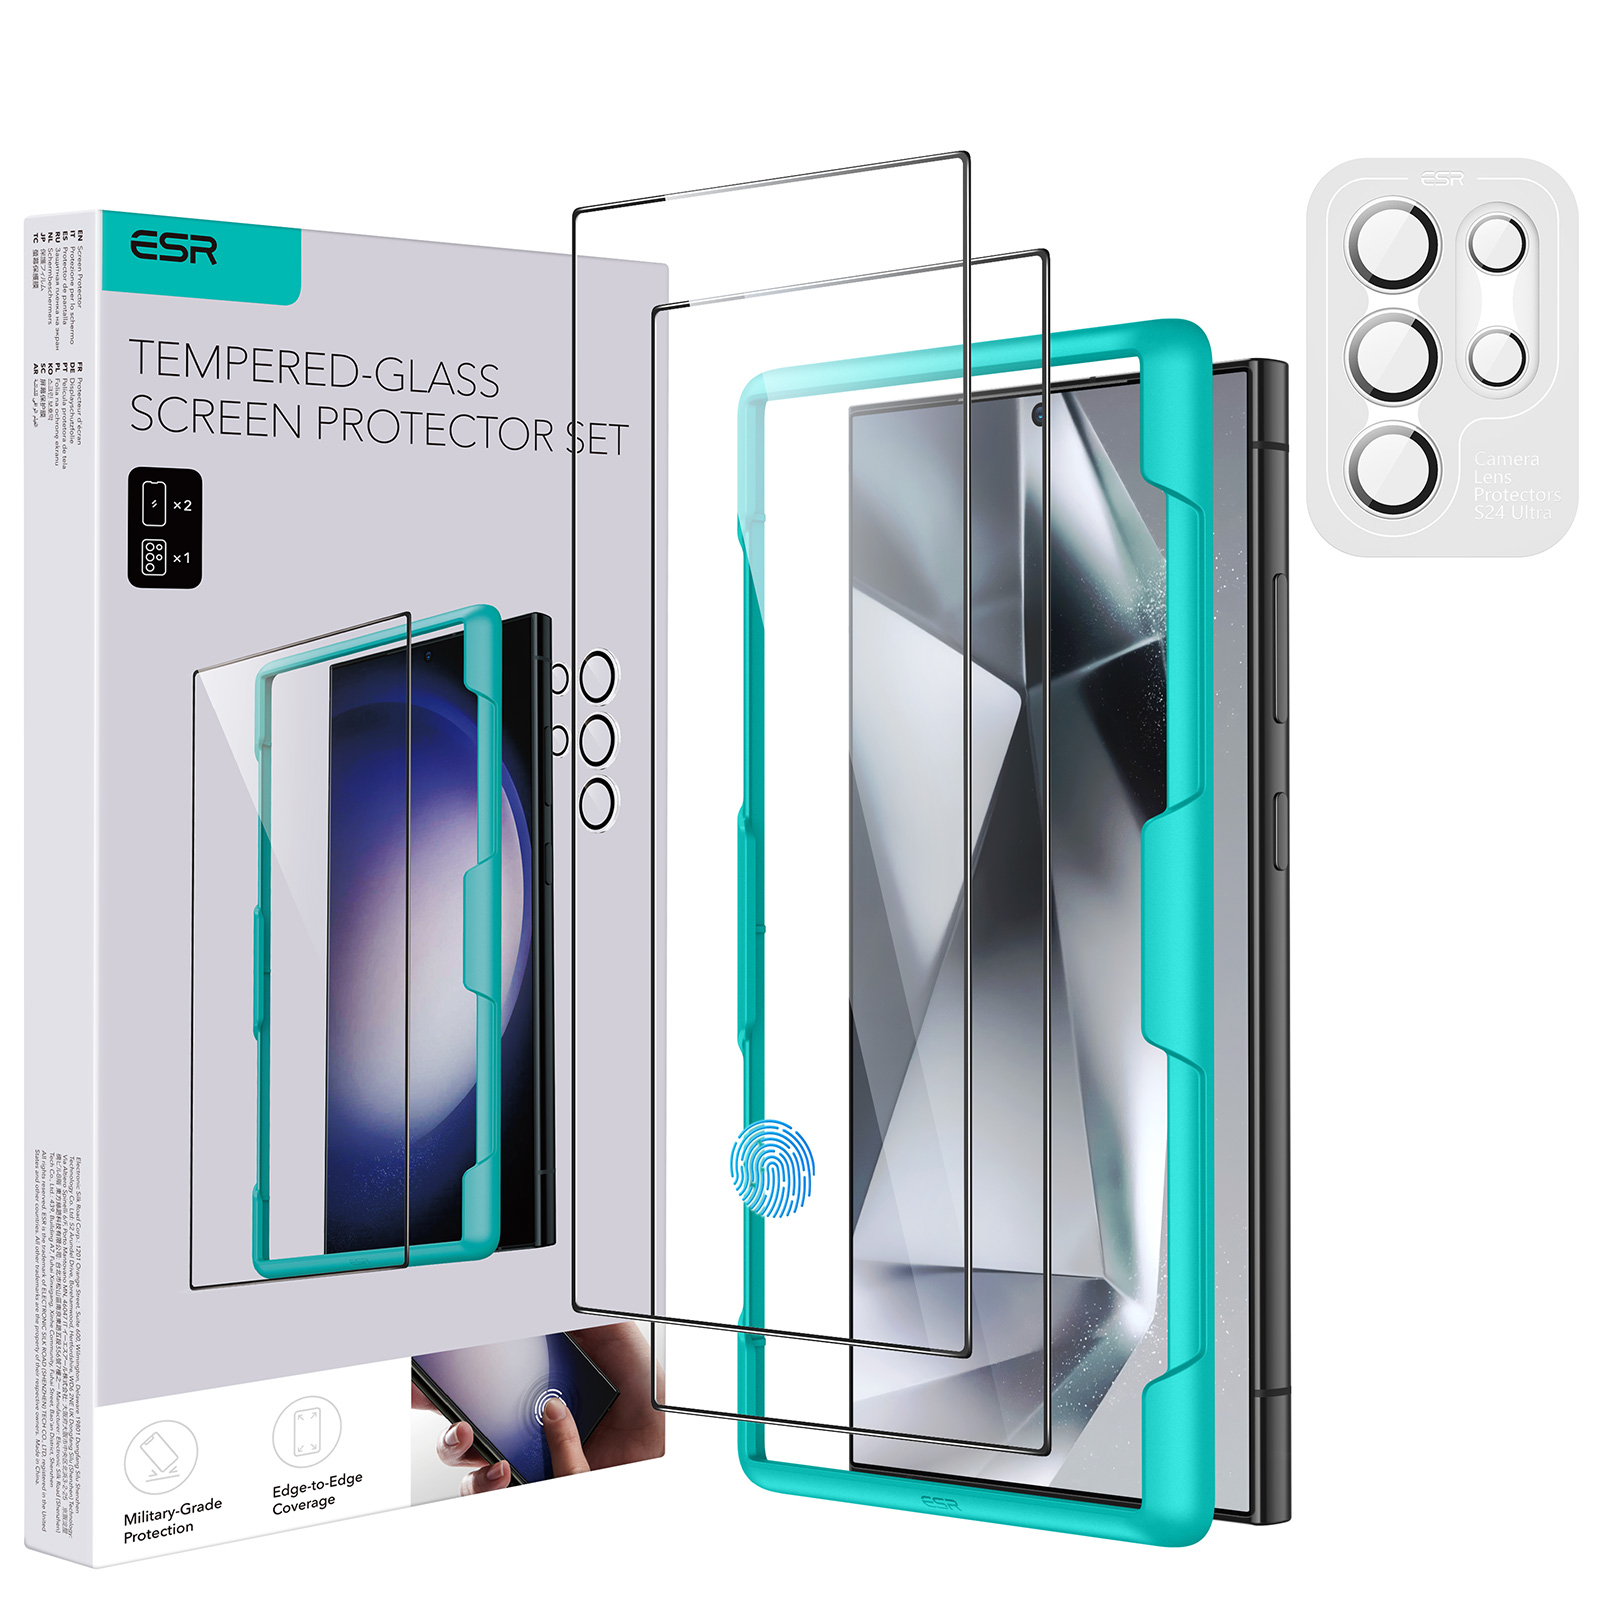 ESR 3+1 Pack for Samsung Galaxy S24 Ultra Screen Protector Set, 3 Tempered Glass Screen Protectors and 1 Set Individual Lens Protectors, 2.5D Curved